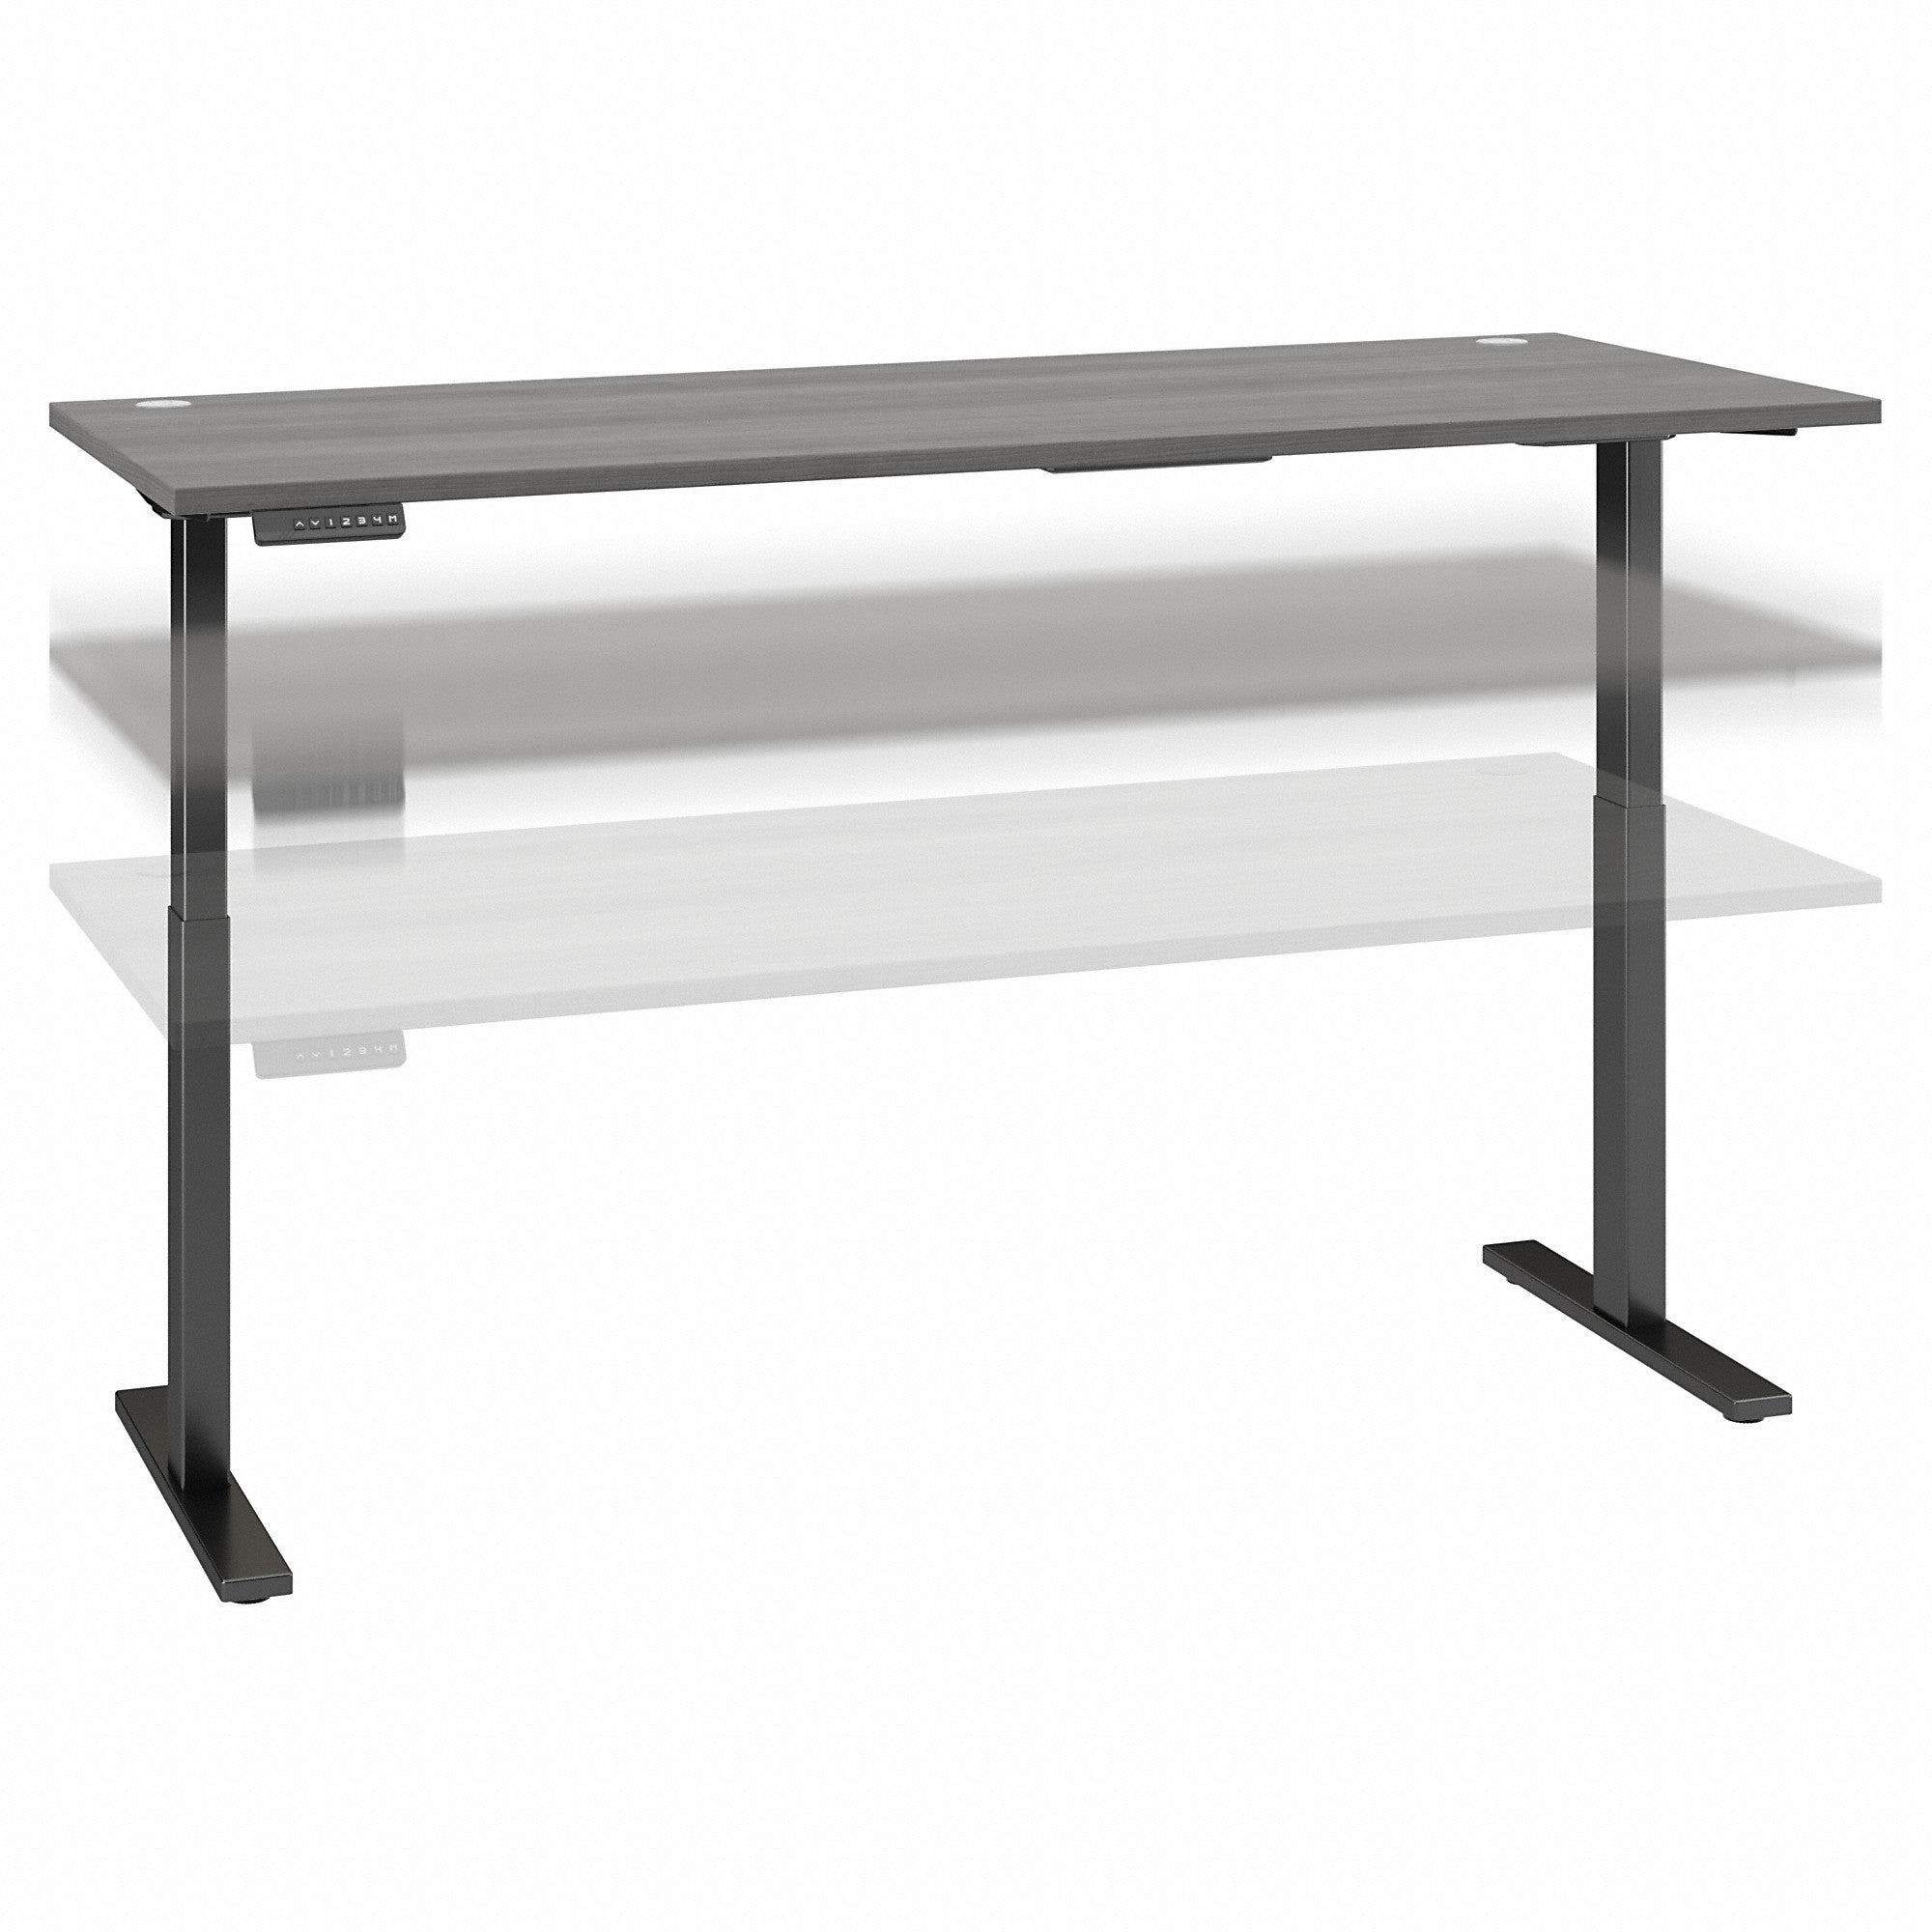 Move 60 Series by Bush Business Furniture 72W x 30D Electric Height Adjustable Standing Desk | Platinum Gray/Black Powder Coat